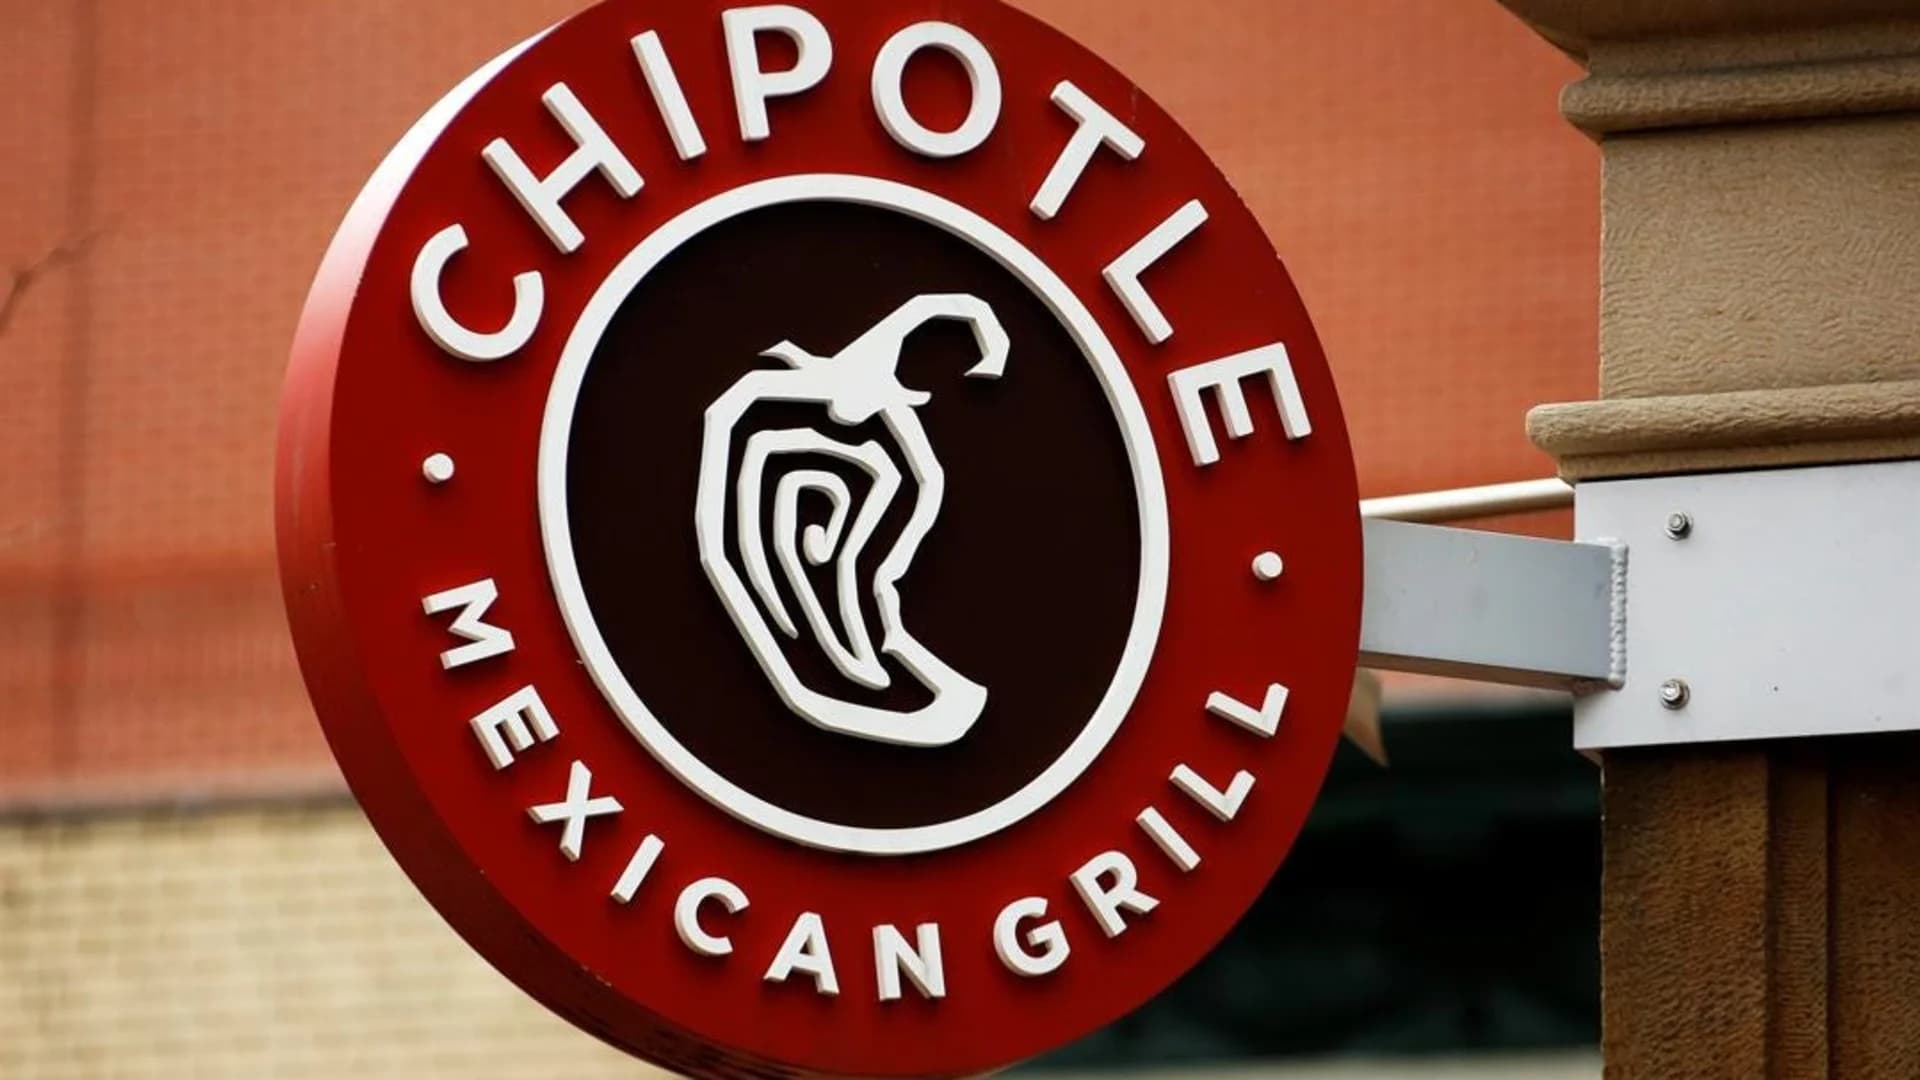 Chipotle offering buy one, get one deal for hockey fan customers